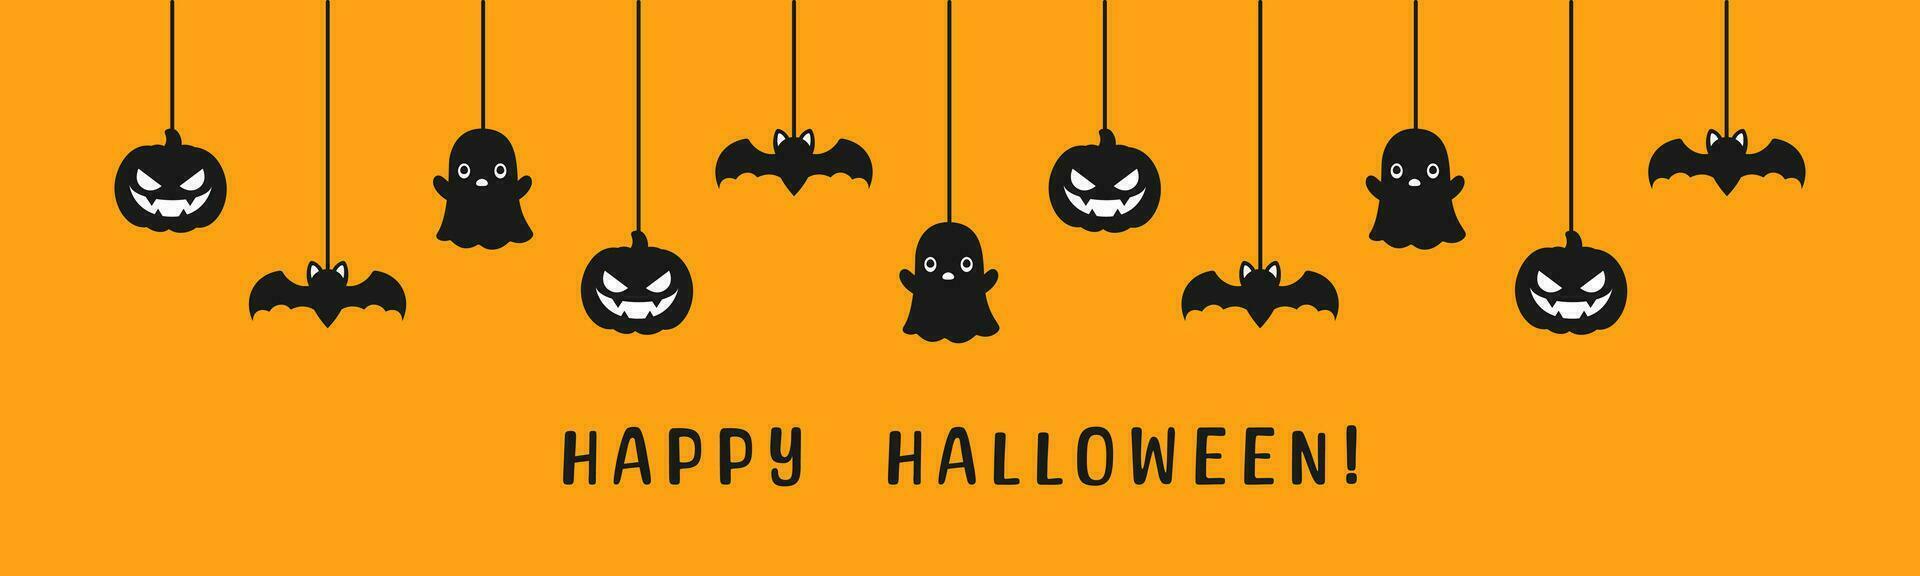 Happy Halloween banner or border with black bats, ghost and jack o lantern pumpkins. Hanging Spooky Ornaments Decoration Vector illustration, trick or treat party invitation